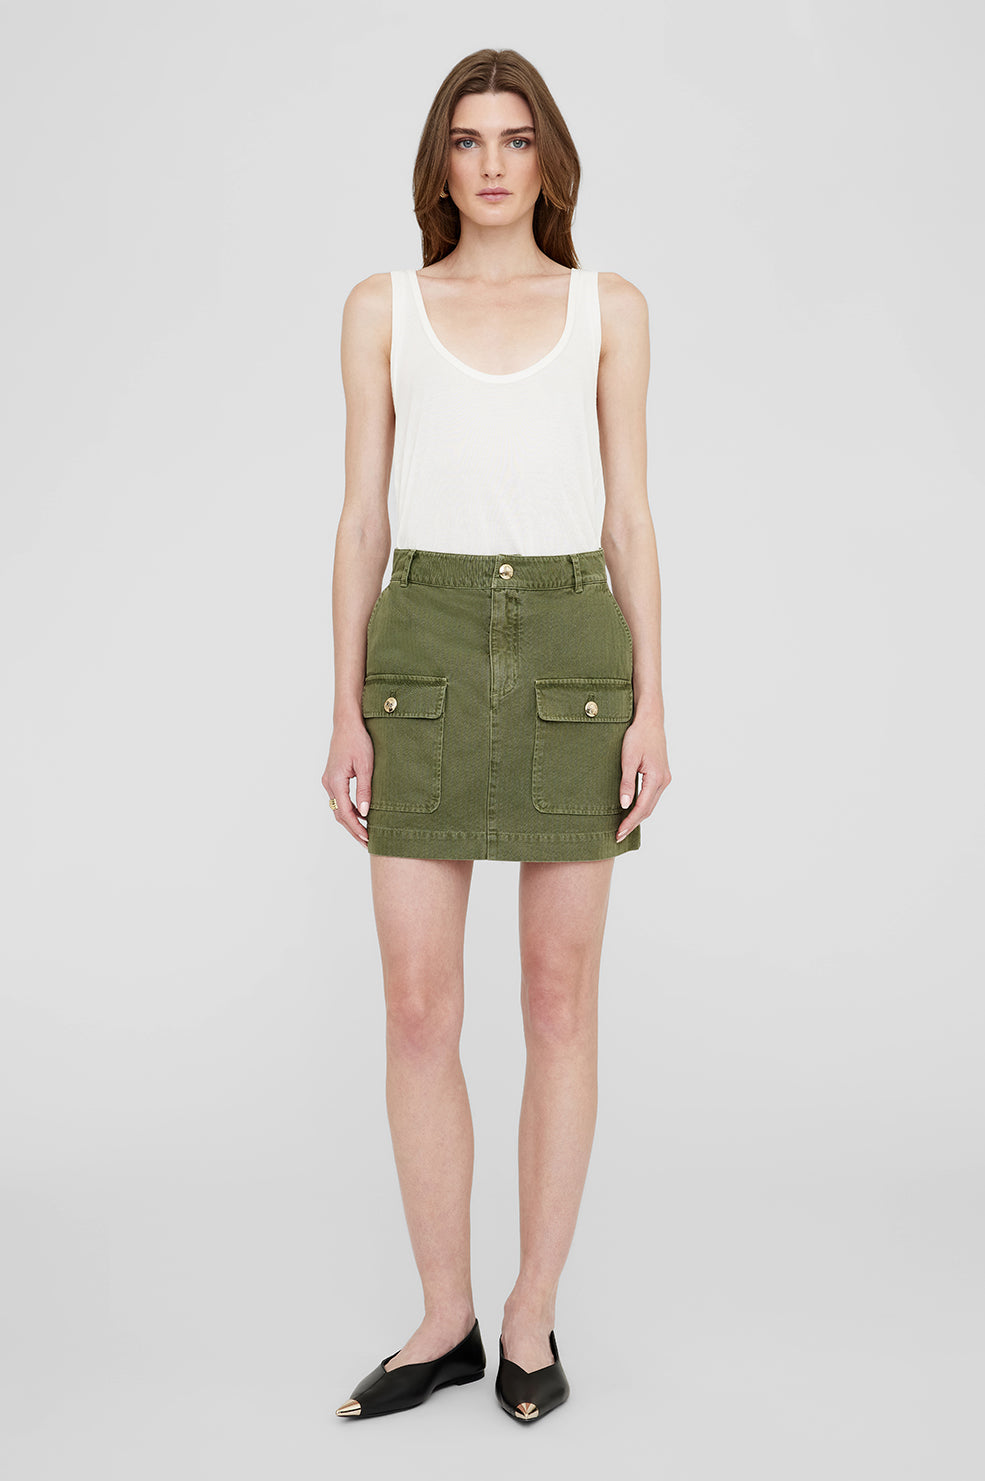 ANINE BING Aliza Skirt - Army Green - On Model Front